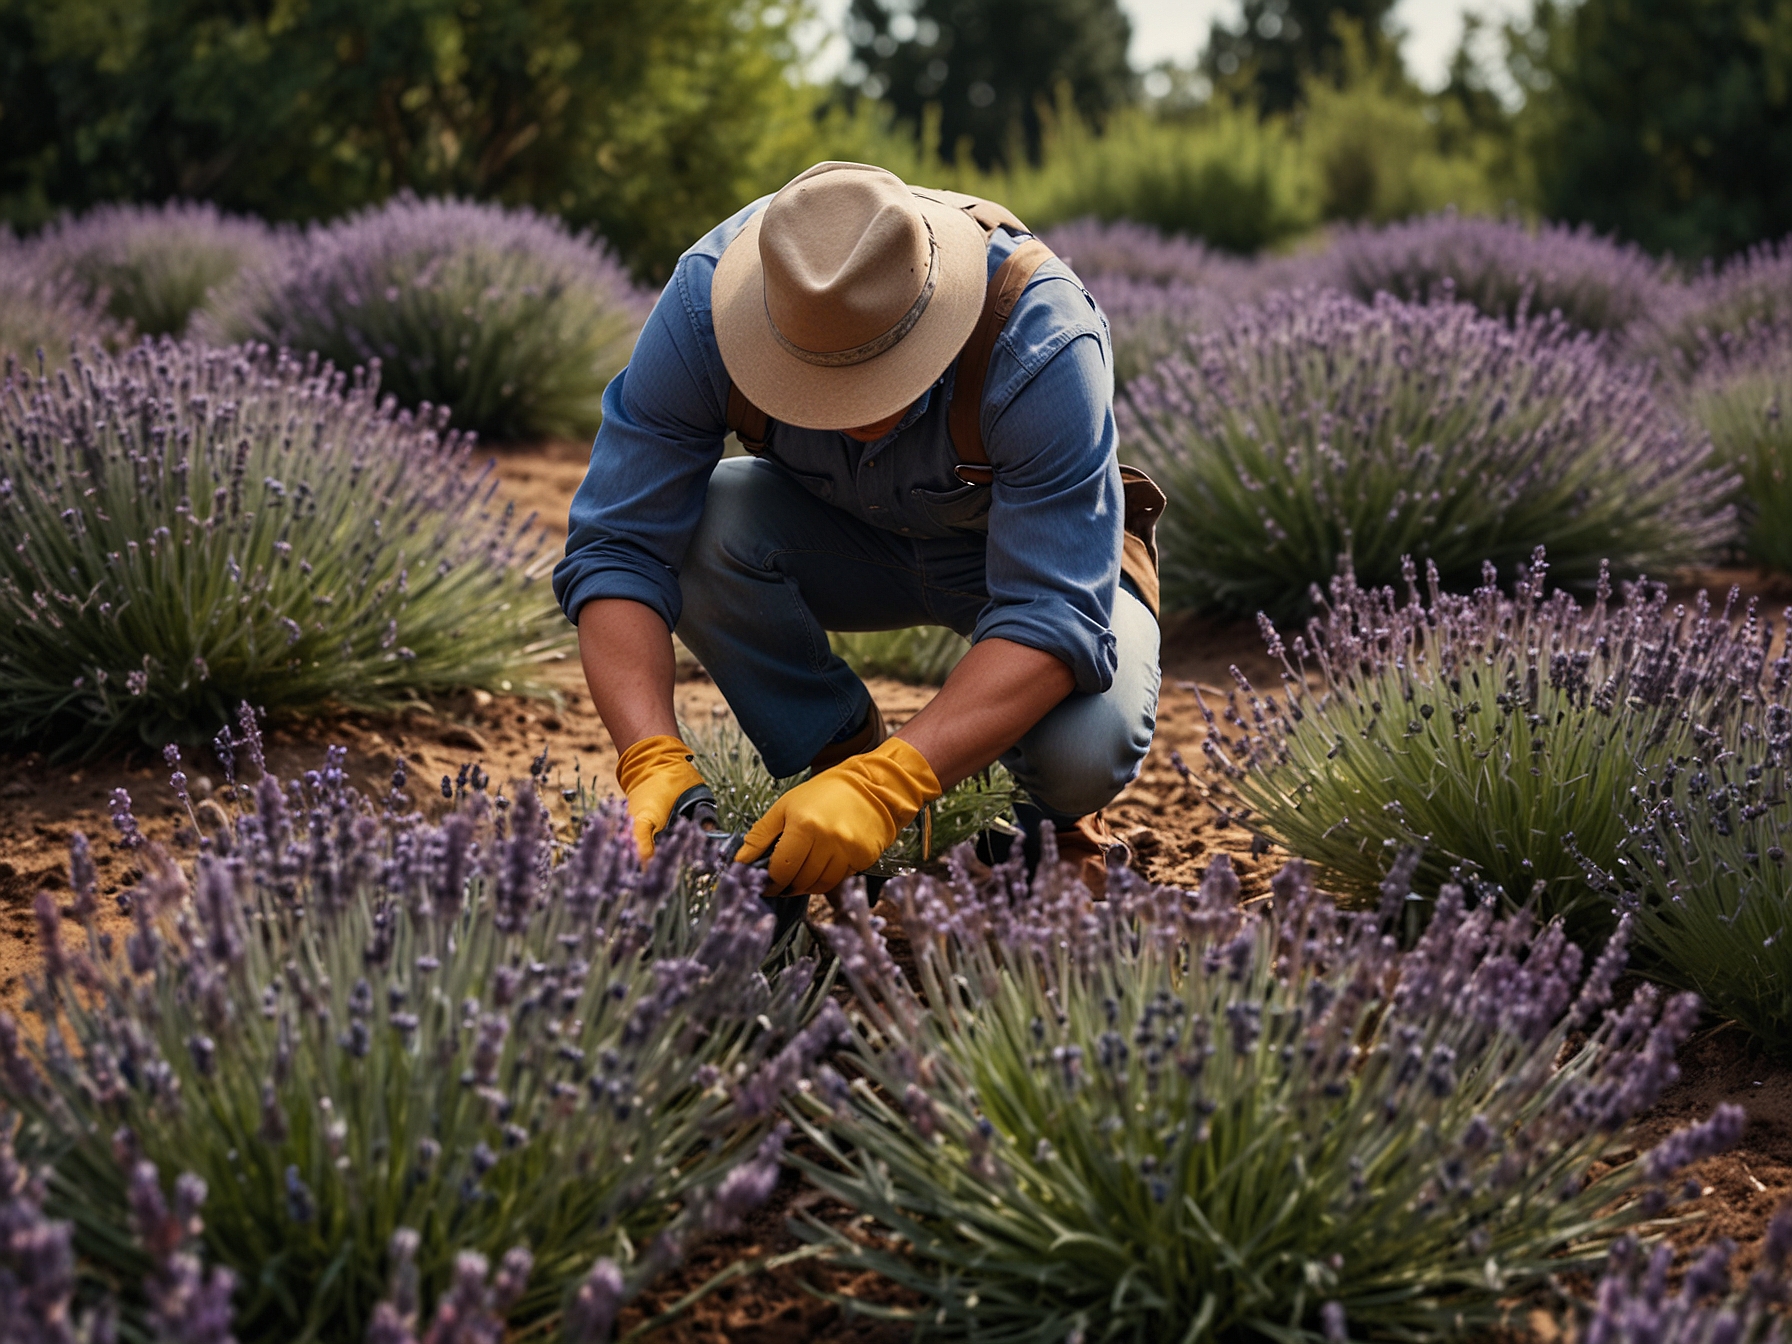 A gardener using sharp shears to prune lavender, focusing on removing spent flower stalks down to the foliage. The trimmed lavender plant looks tidy and well-shaped.